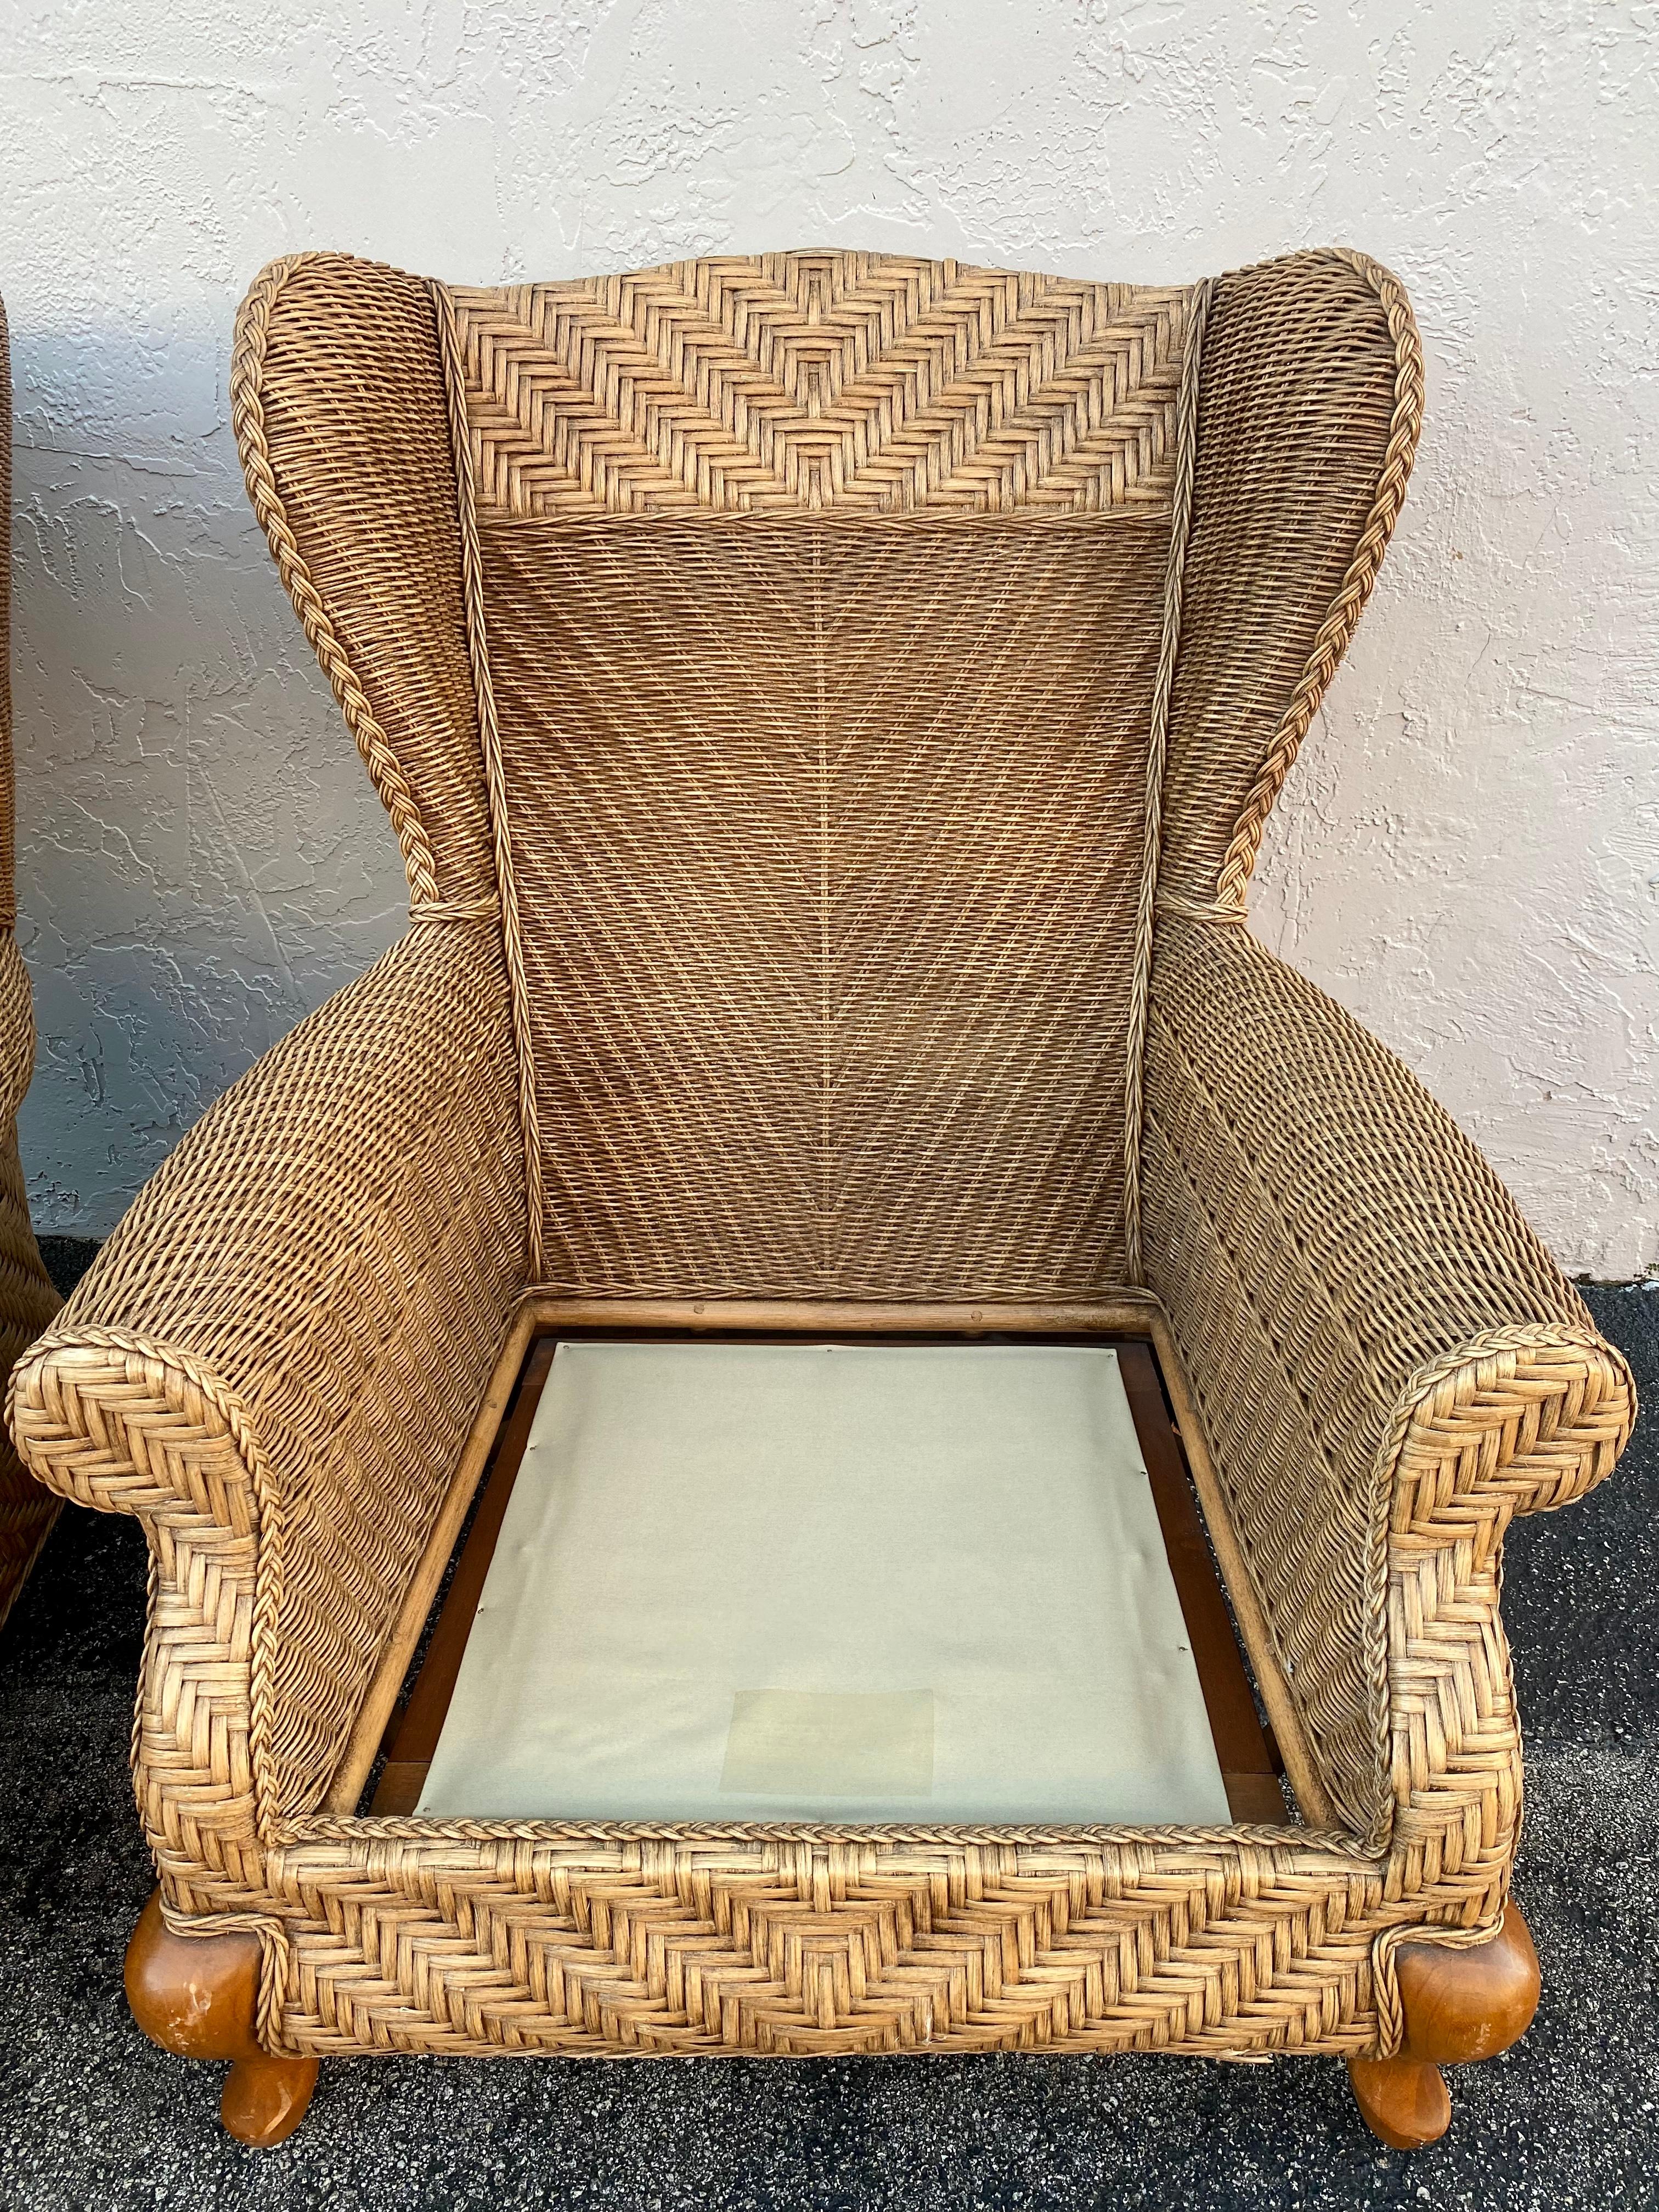 1980s Rattan Queen Anne Style XL Wingback Chairs, Set of 2 For Sale 5